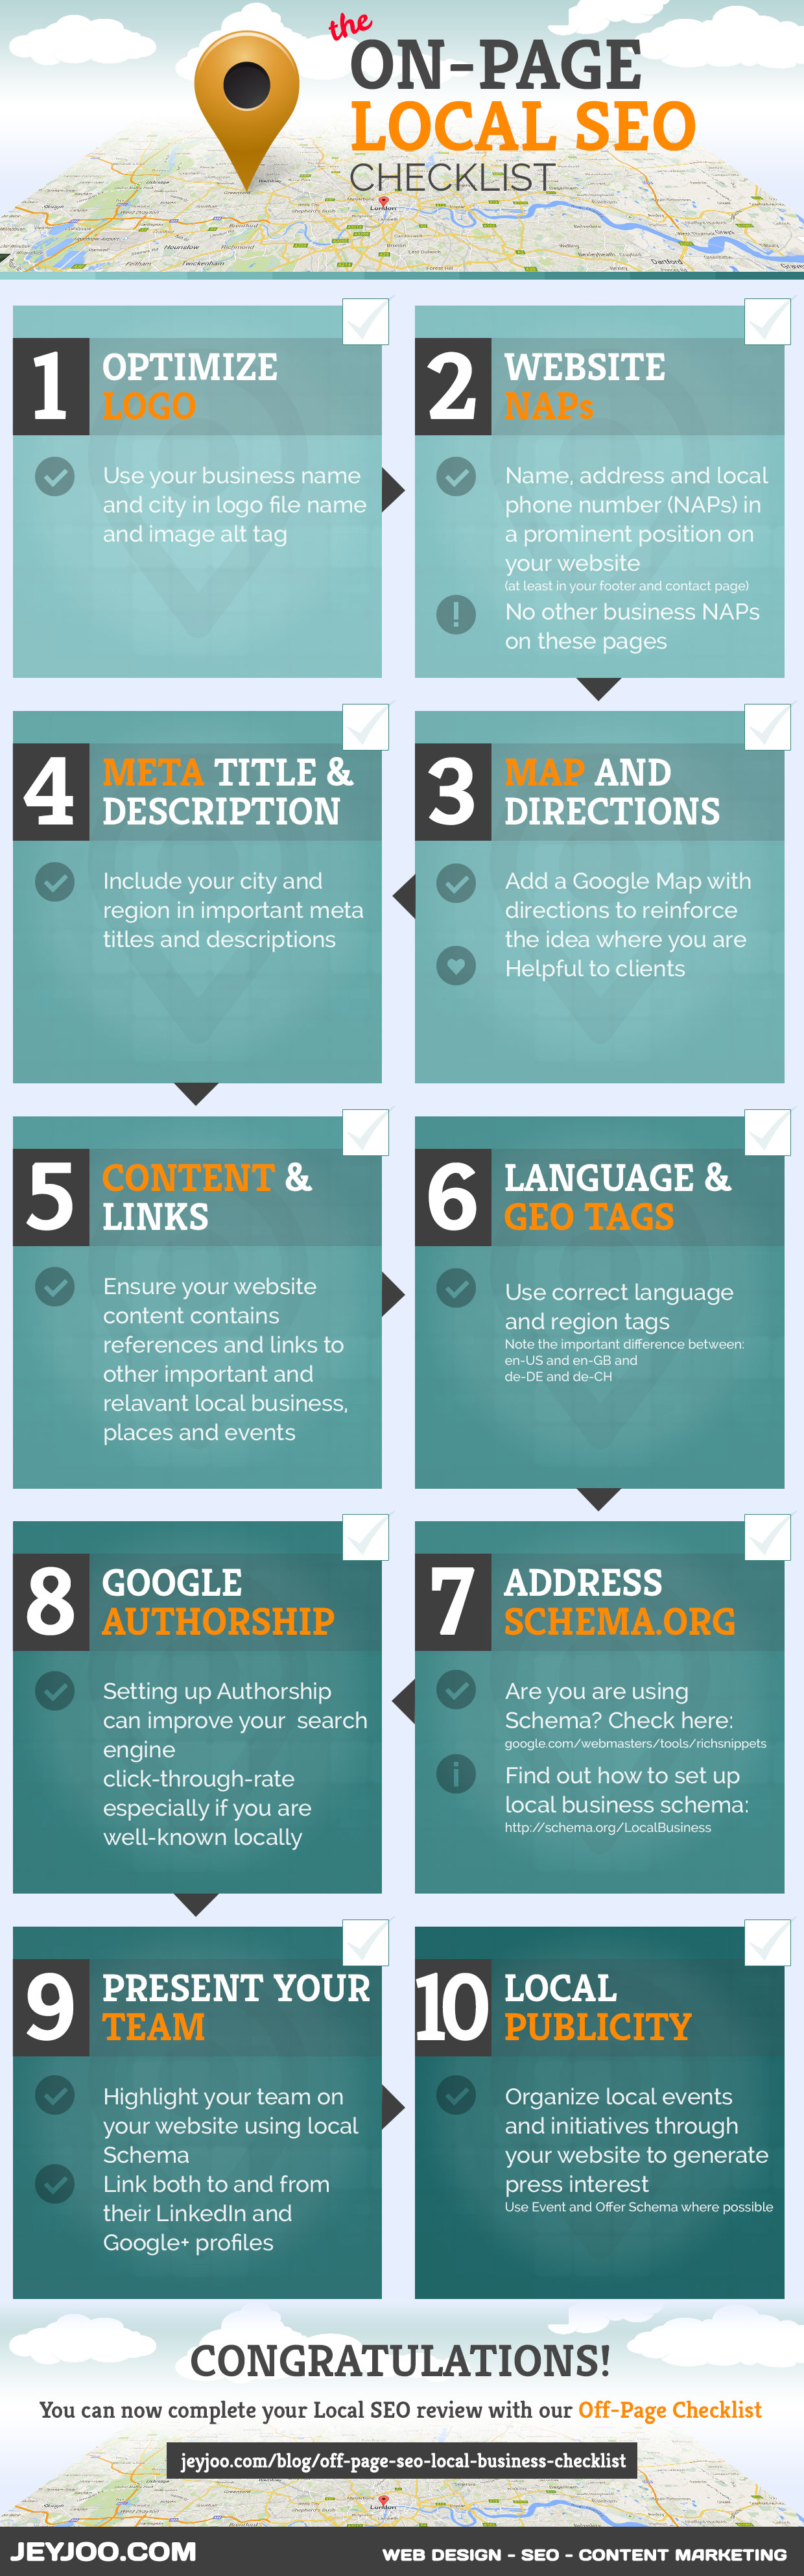 On-Page Local SEO infographic